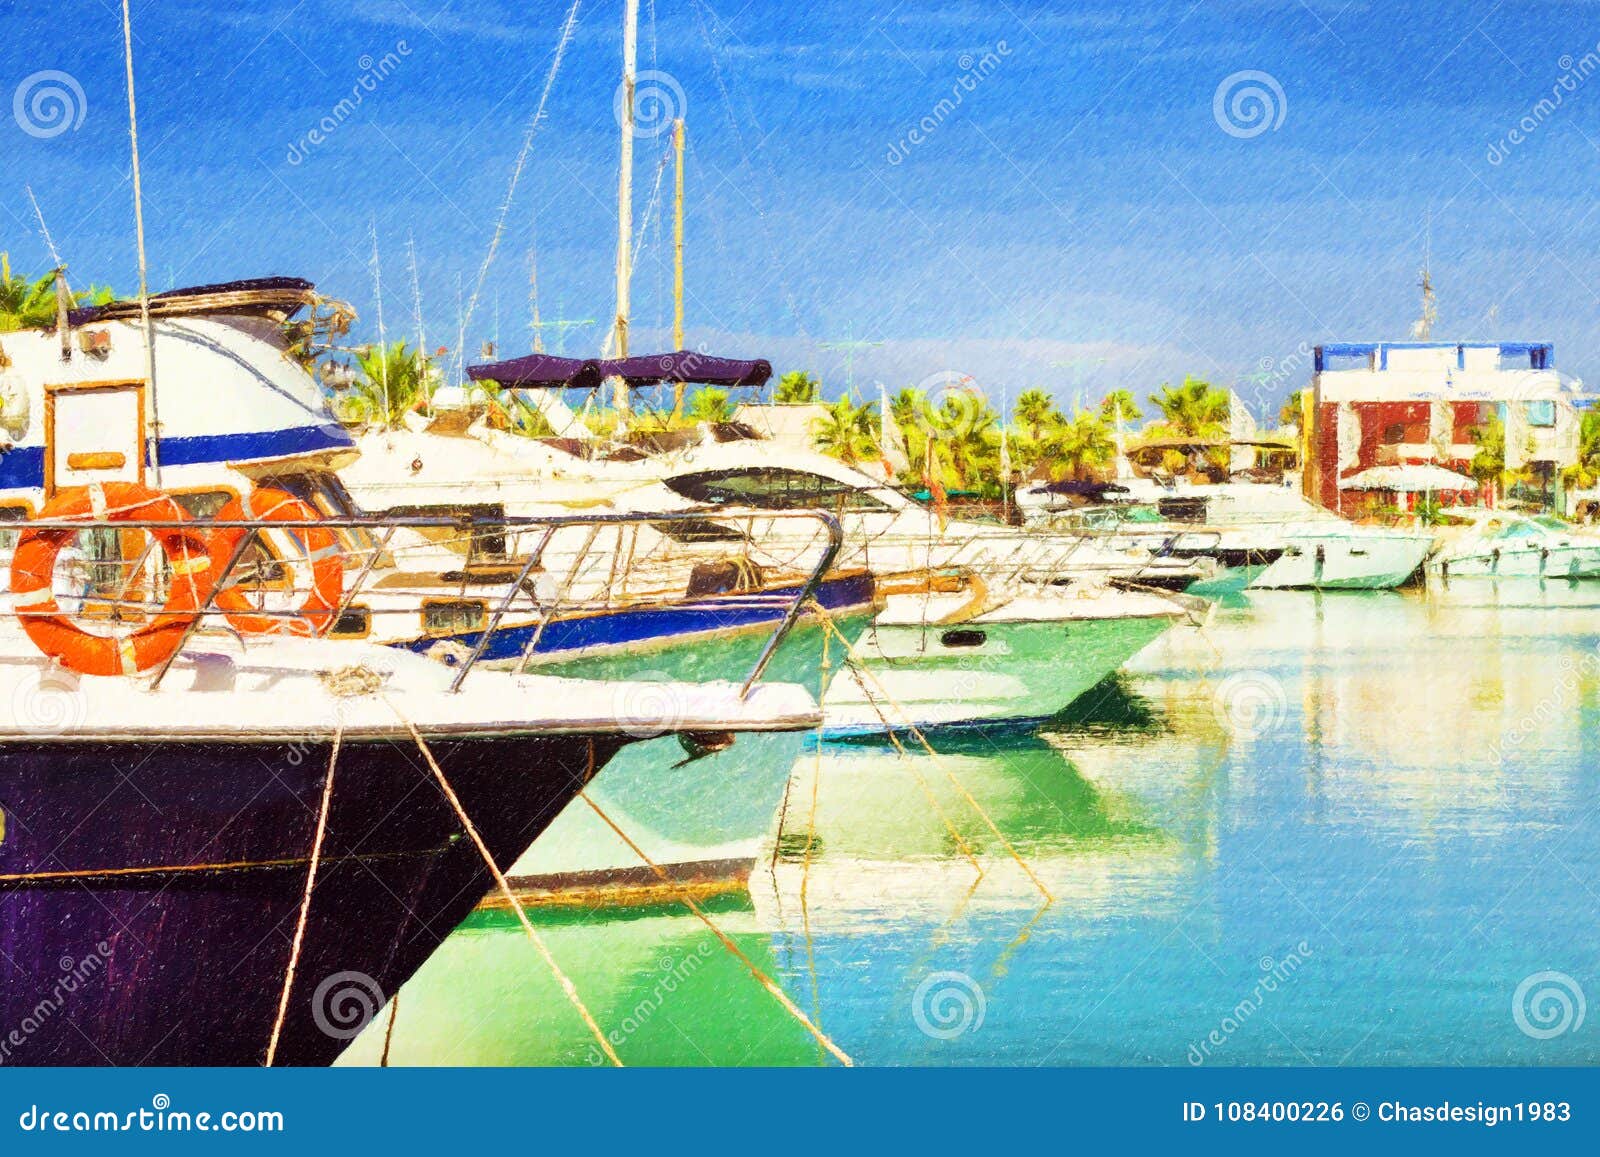 yachts and boats in torrevieja, spain